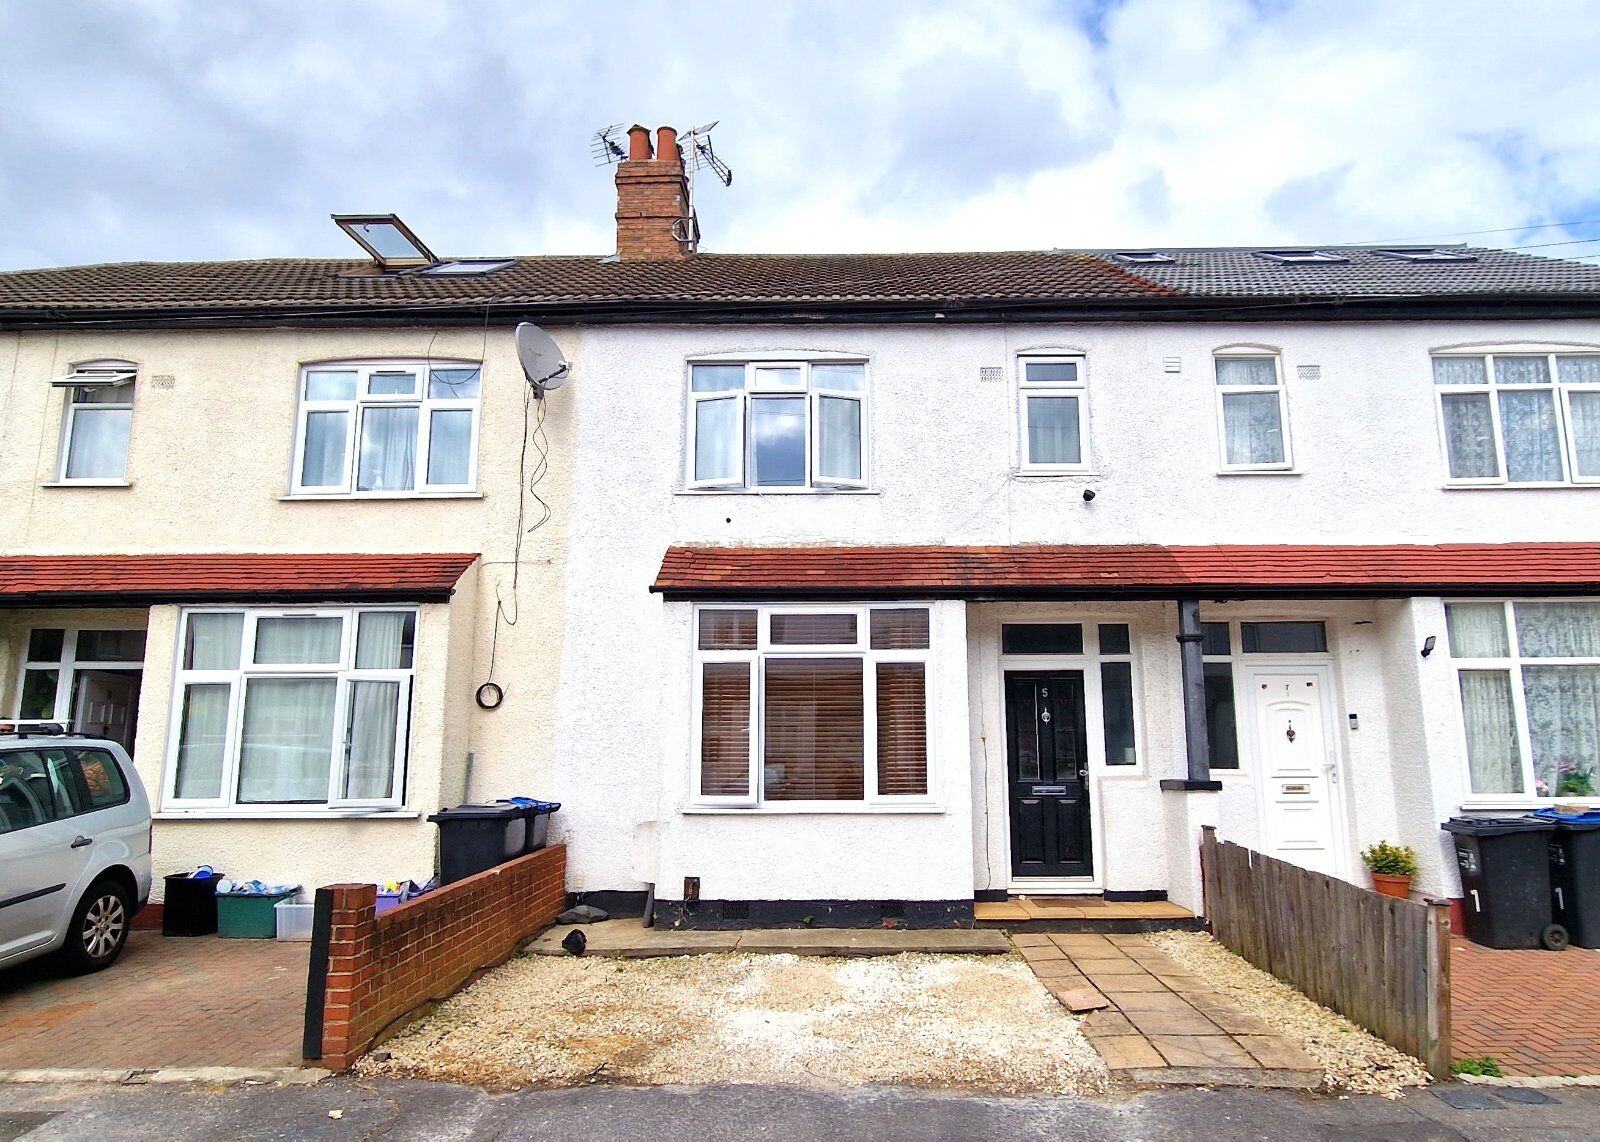 3 bedroom mid terraced house for sale Harwood Avenue, Mitcham, CR4, main image